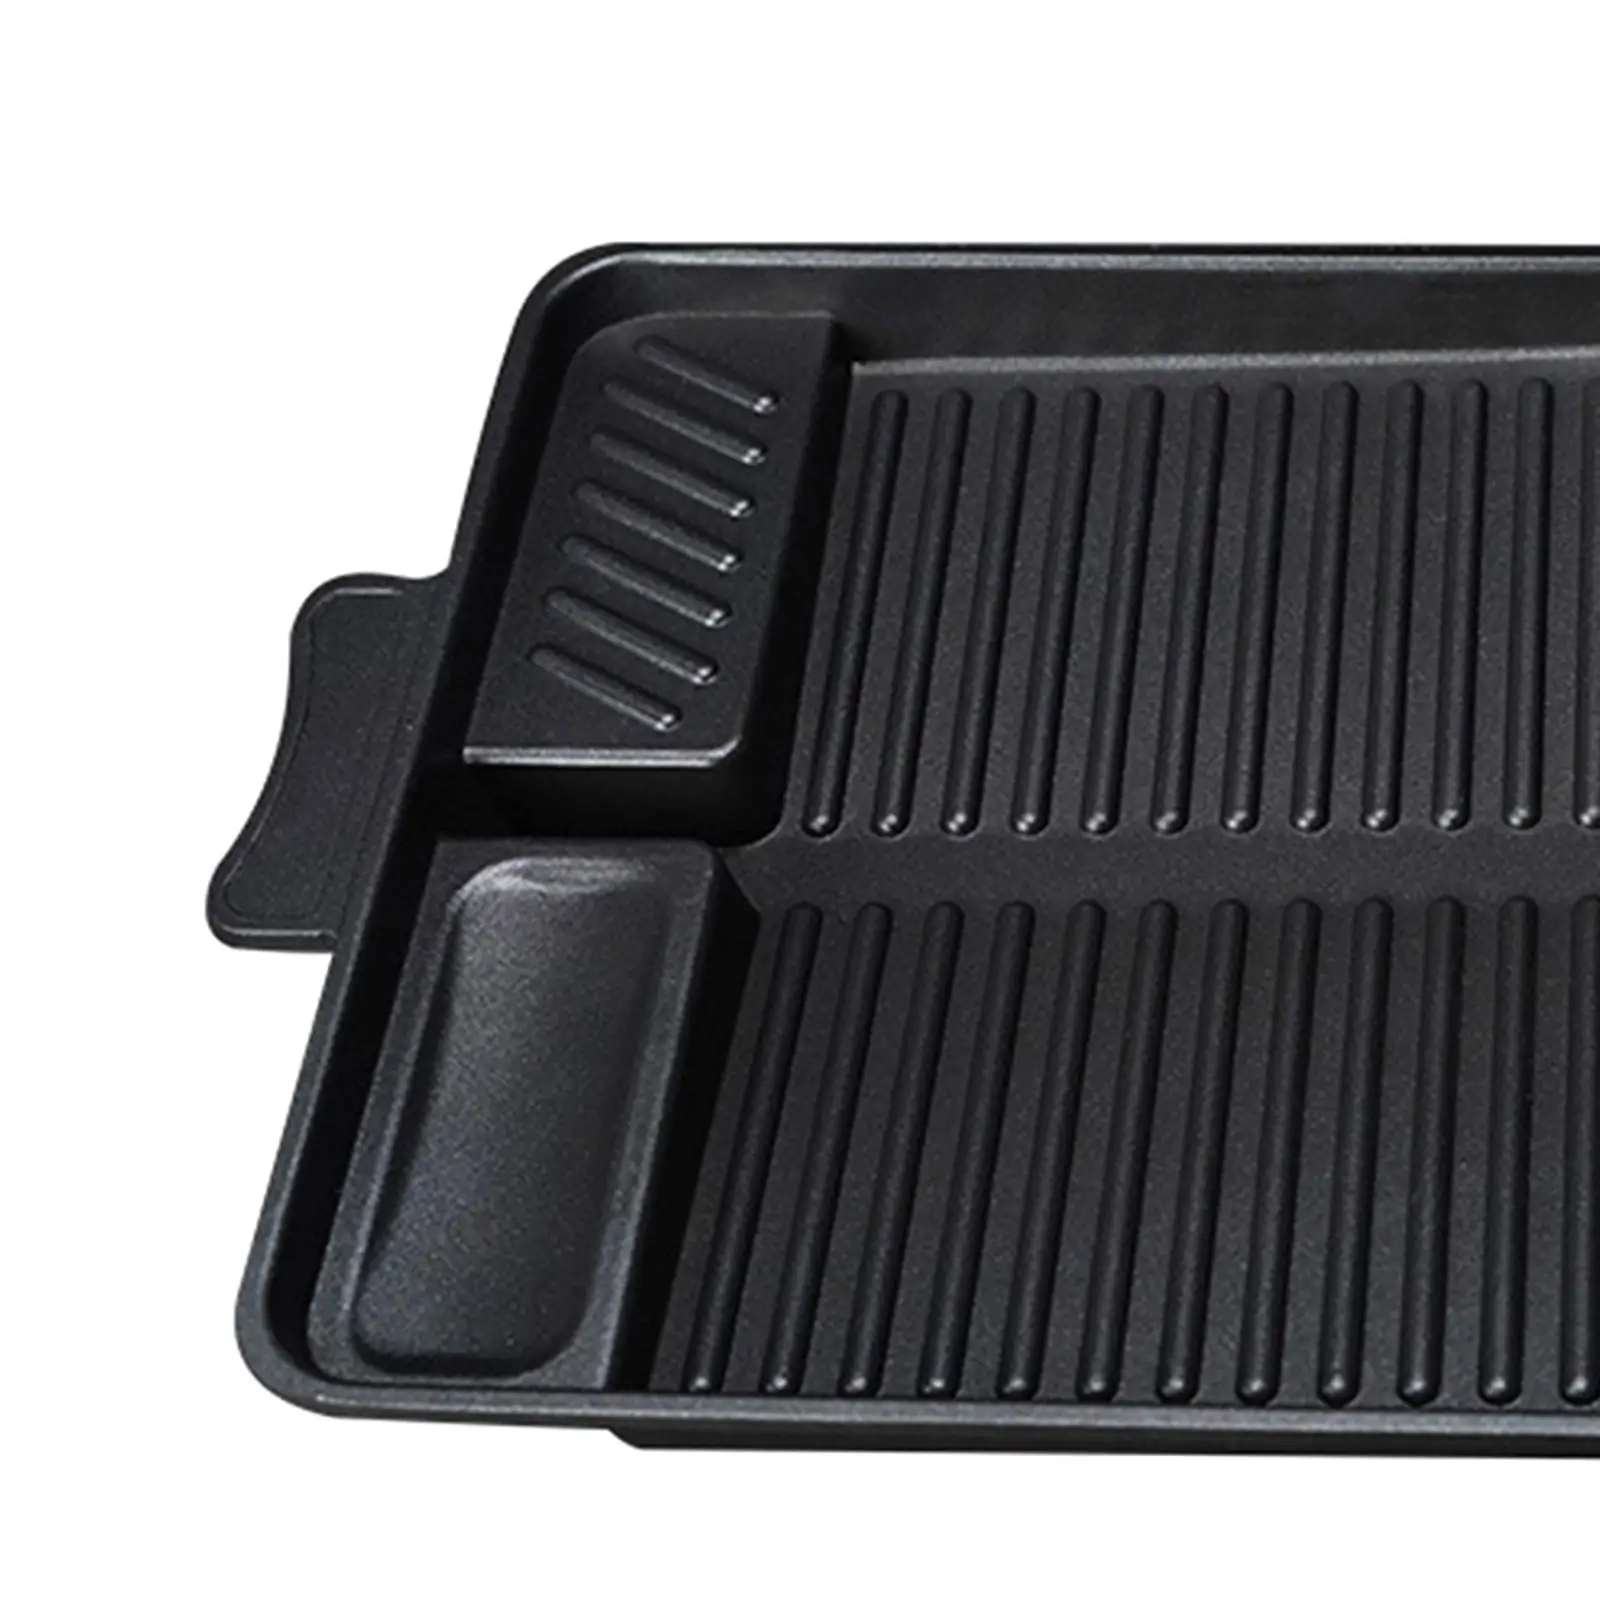 Portable Pan Griddle Plate Nonstick with Handle for Barbecue Outdoor Cooking